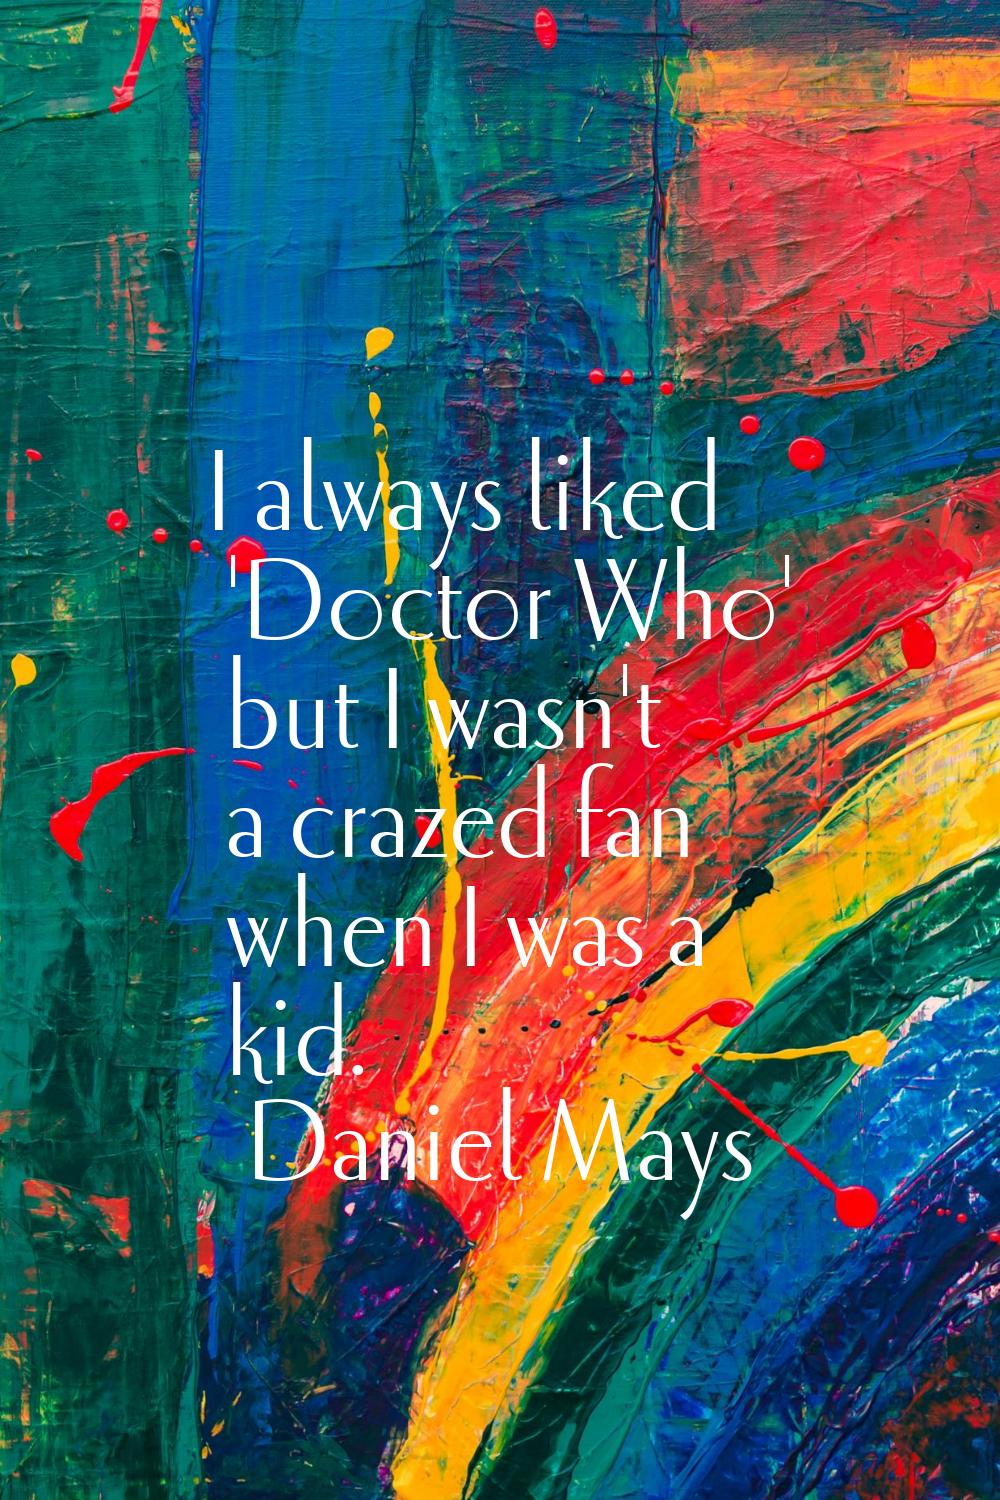 I always liked 'Doctor Who' but I wasn't a crazed fan when I was a kid.